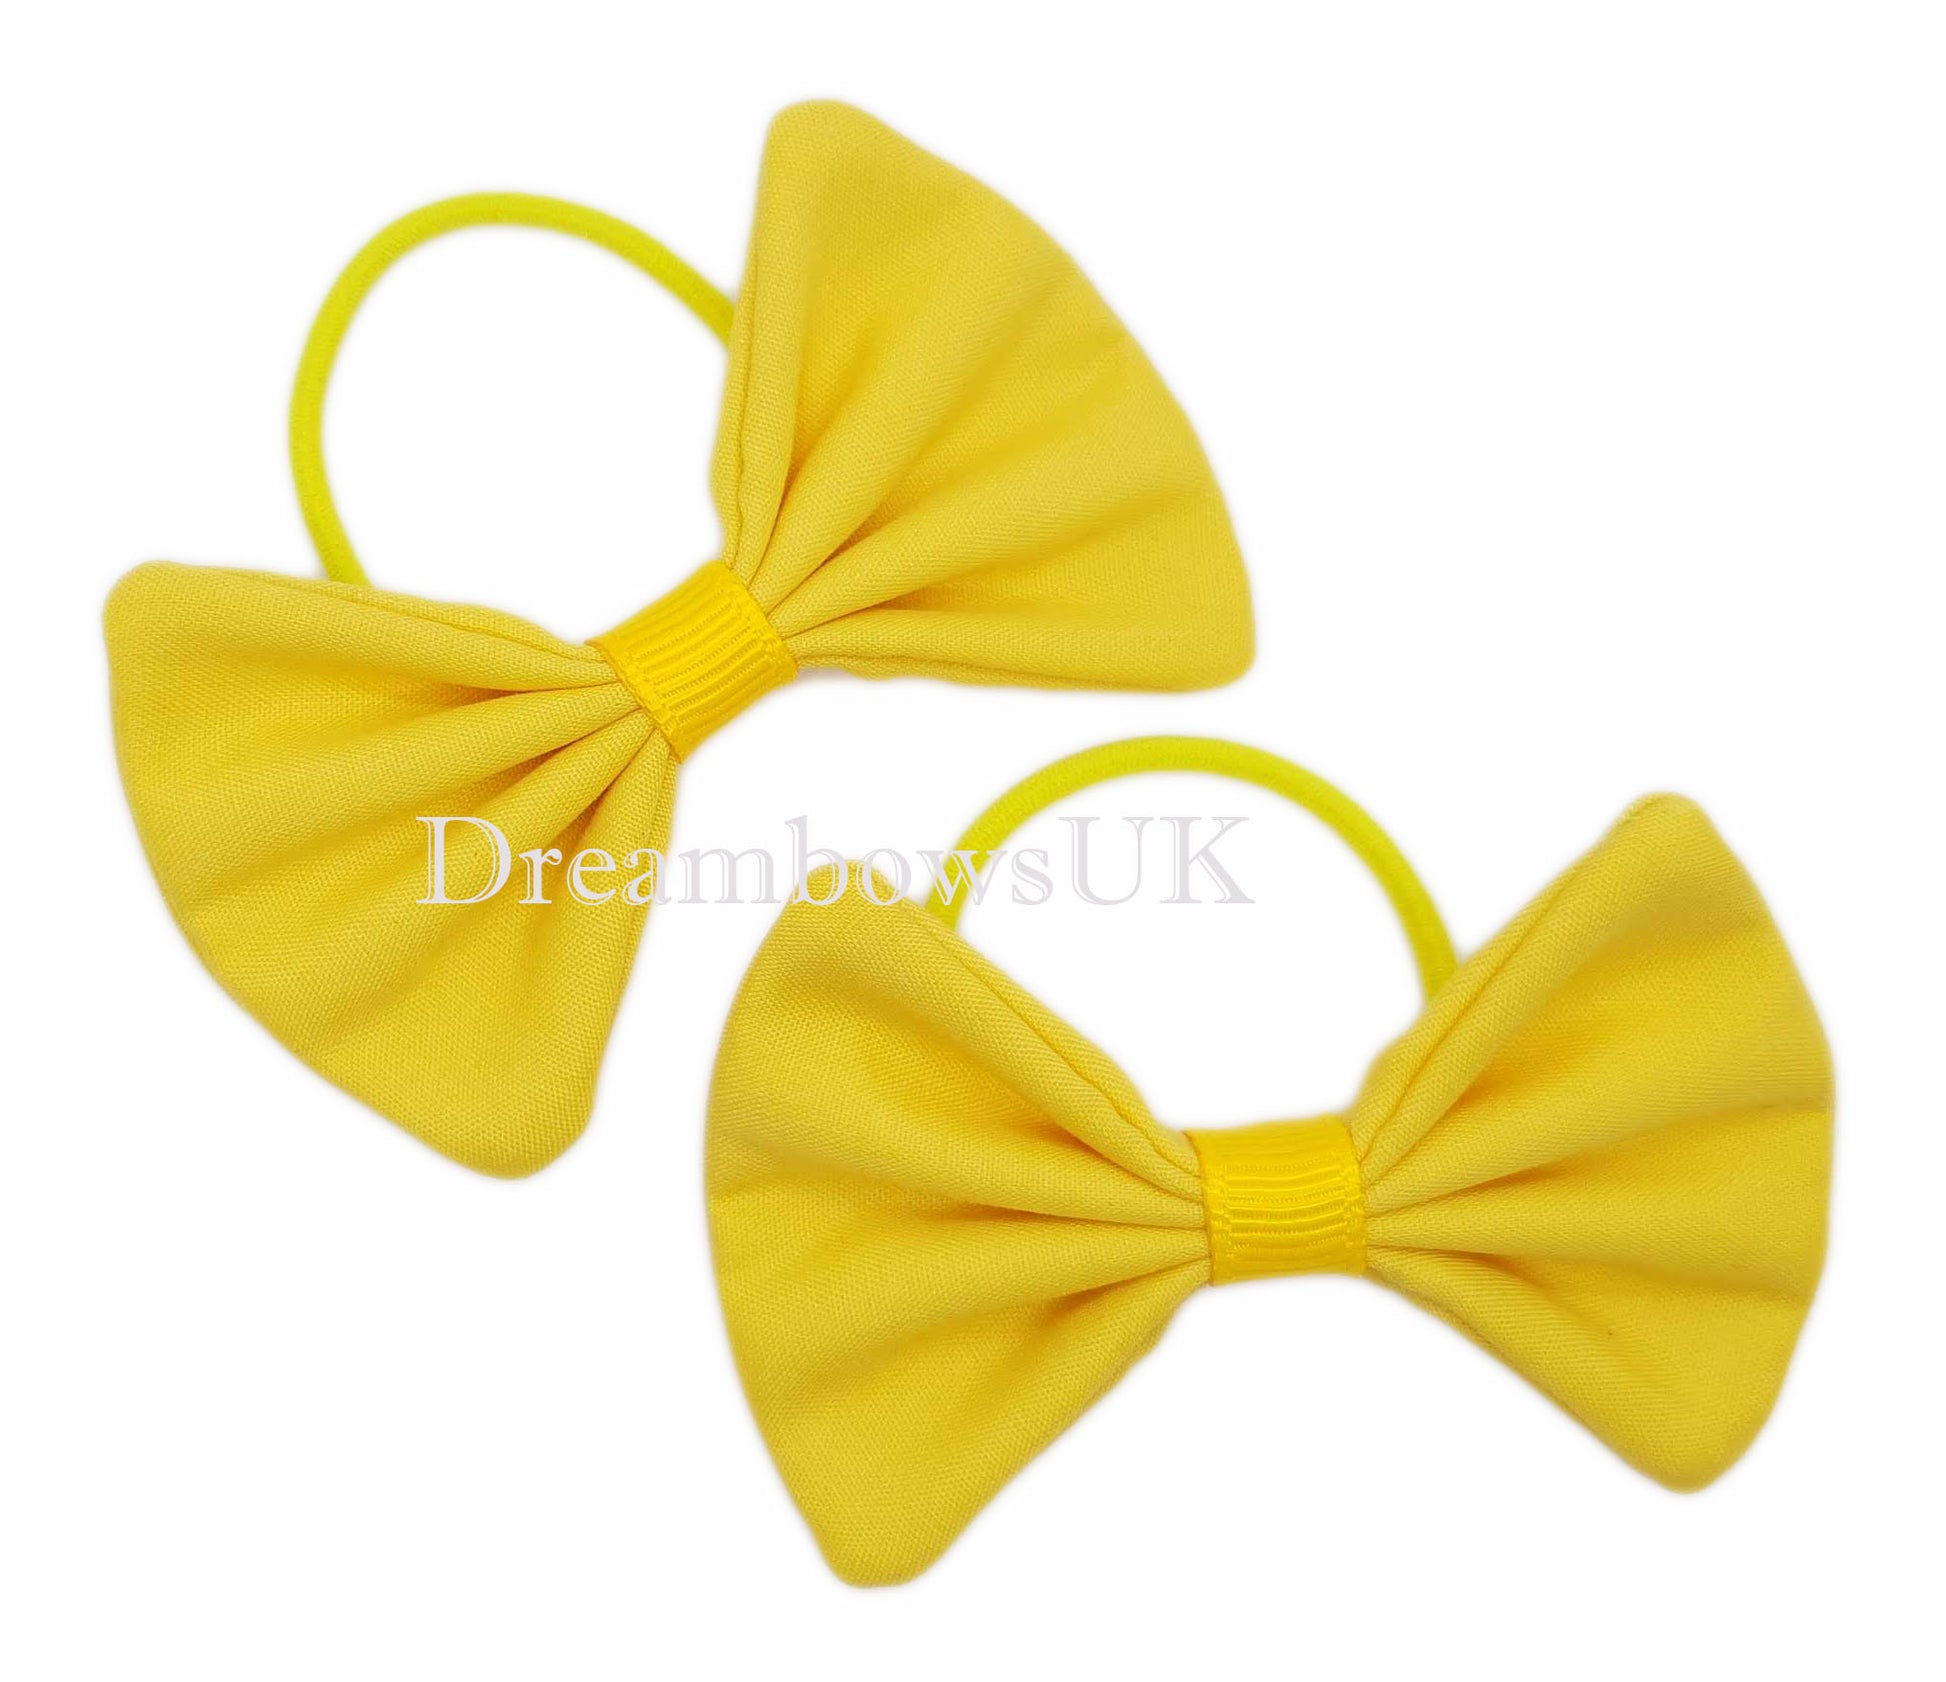 Golden yellow hair accessory bows on thin hair bobbles